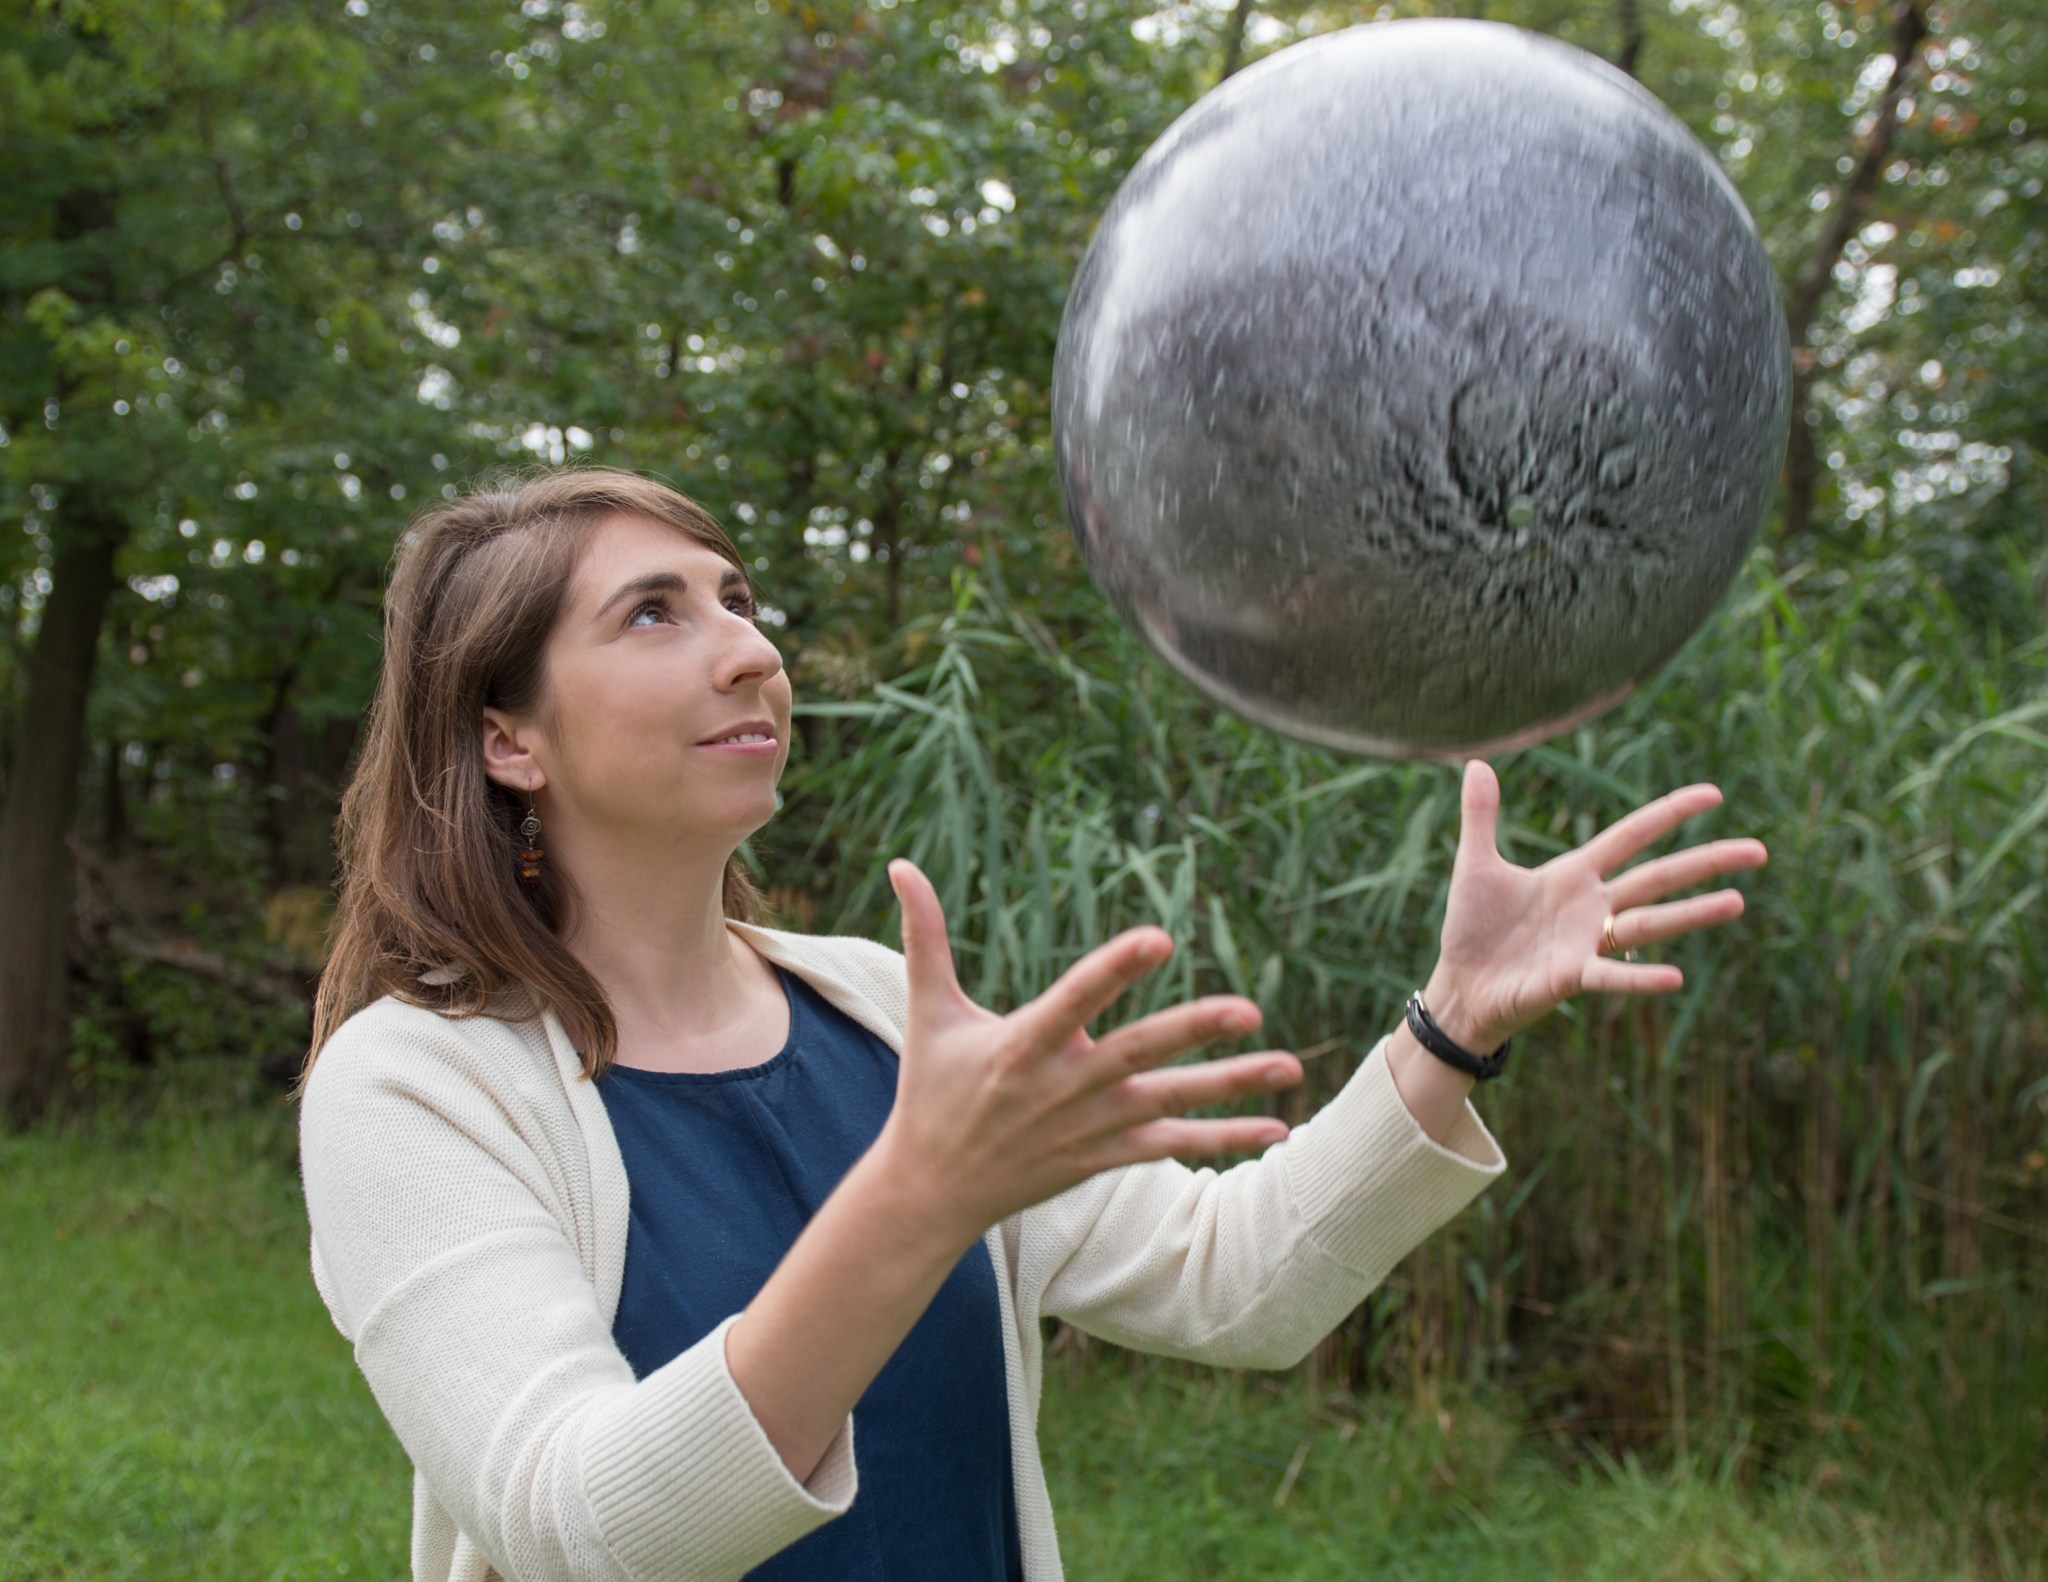 Woman with brown hair and fair skin wears a blue top and cream sweater. She is outside in front of trees and is tossing a model of the Moon into the air. 